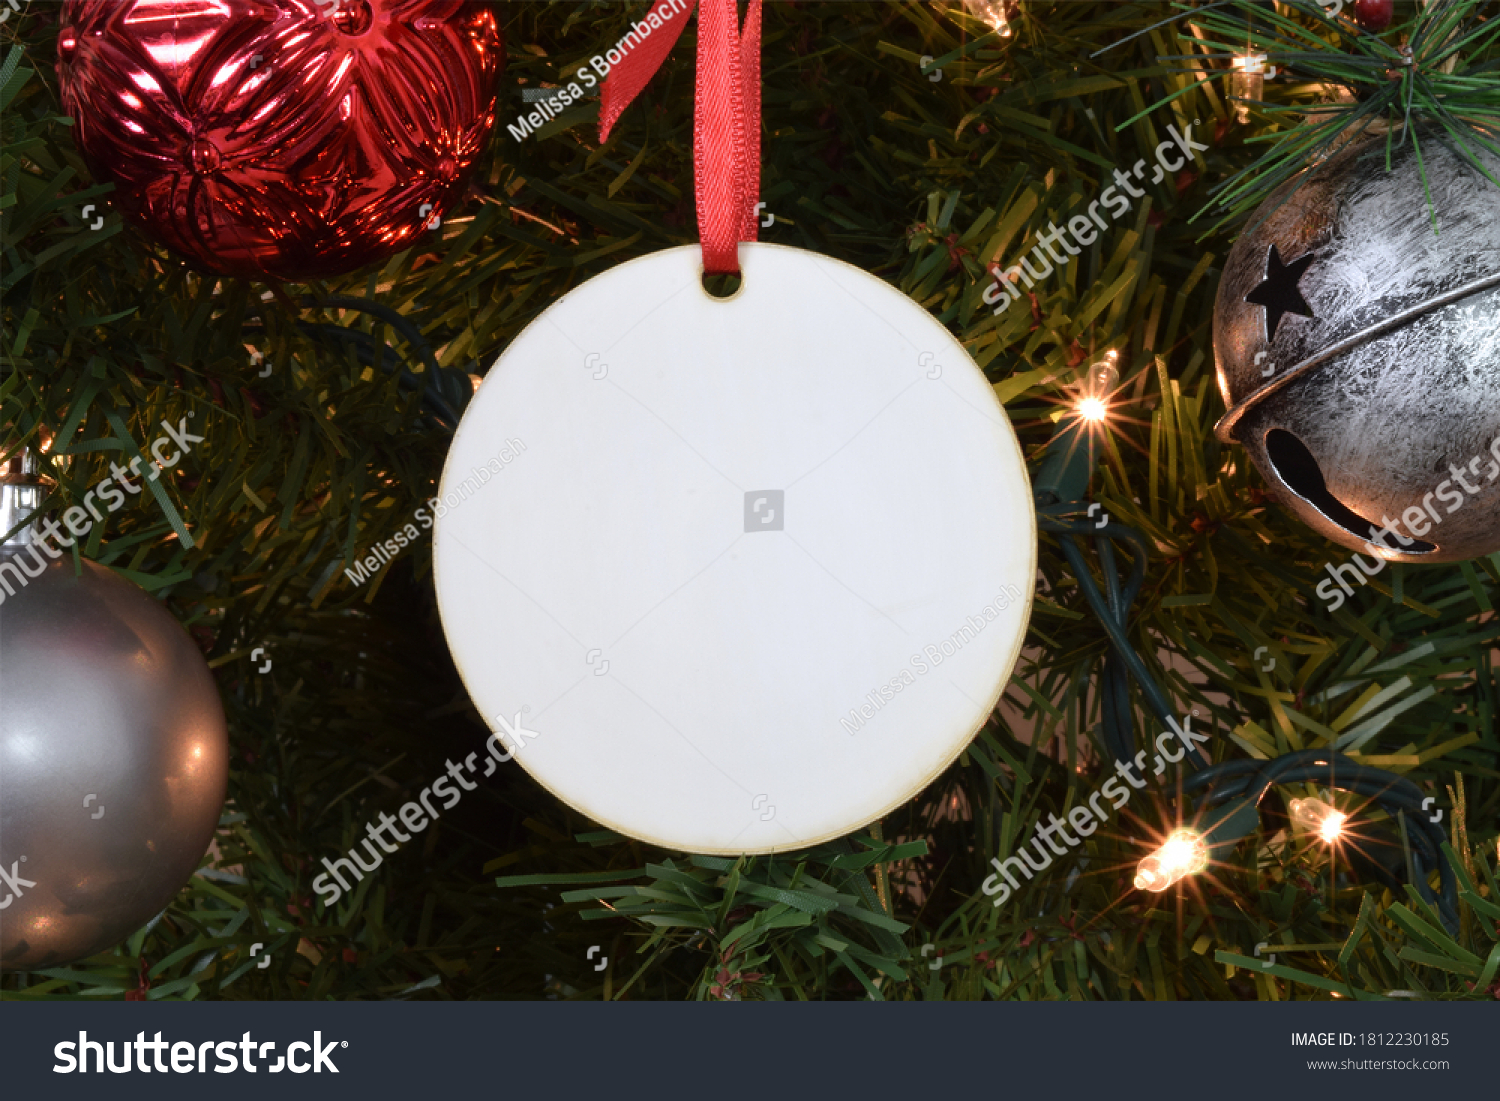 Blank Round Christmas Ornament hanging from a lit up Christmas tree surrounded by ornaments.  #1812230185